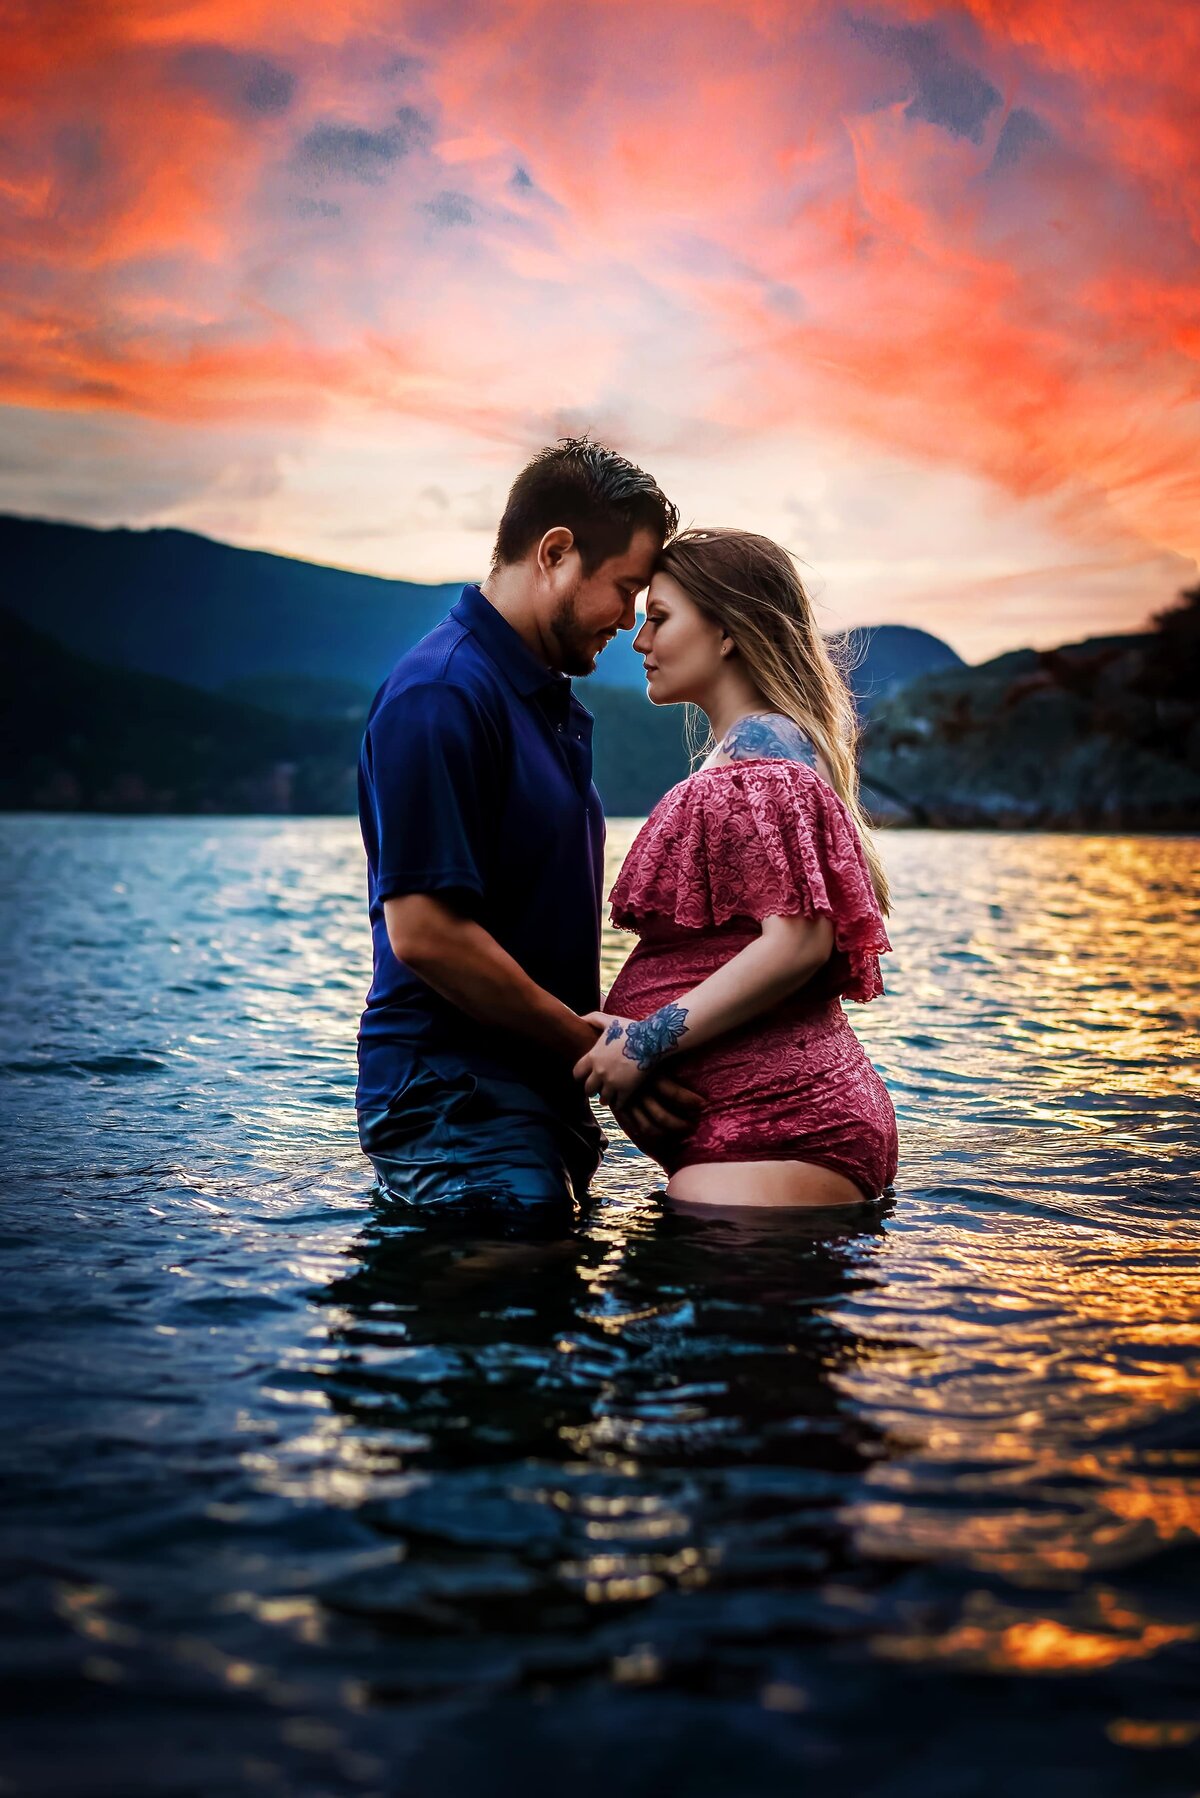 Pregnant woman and husband in the ocean at sunset.